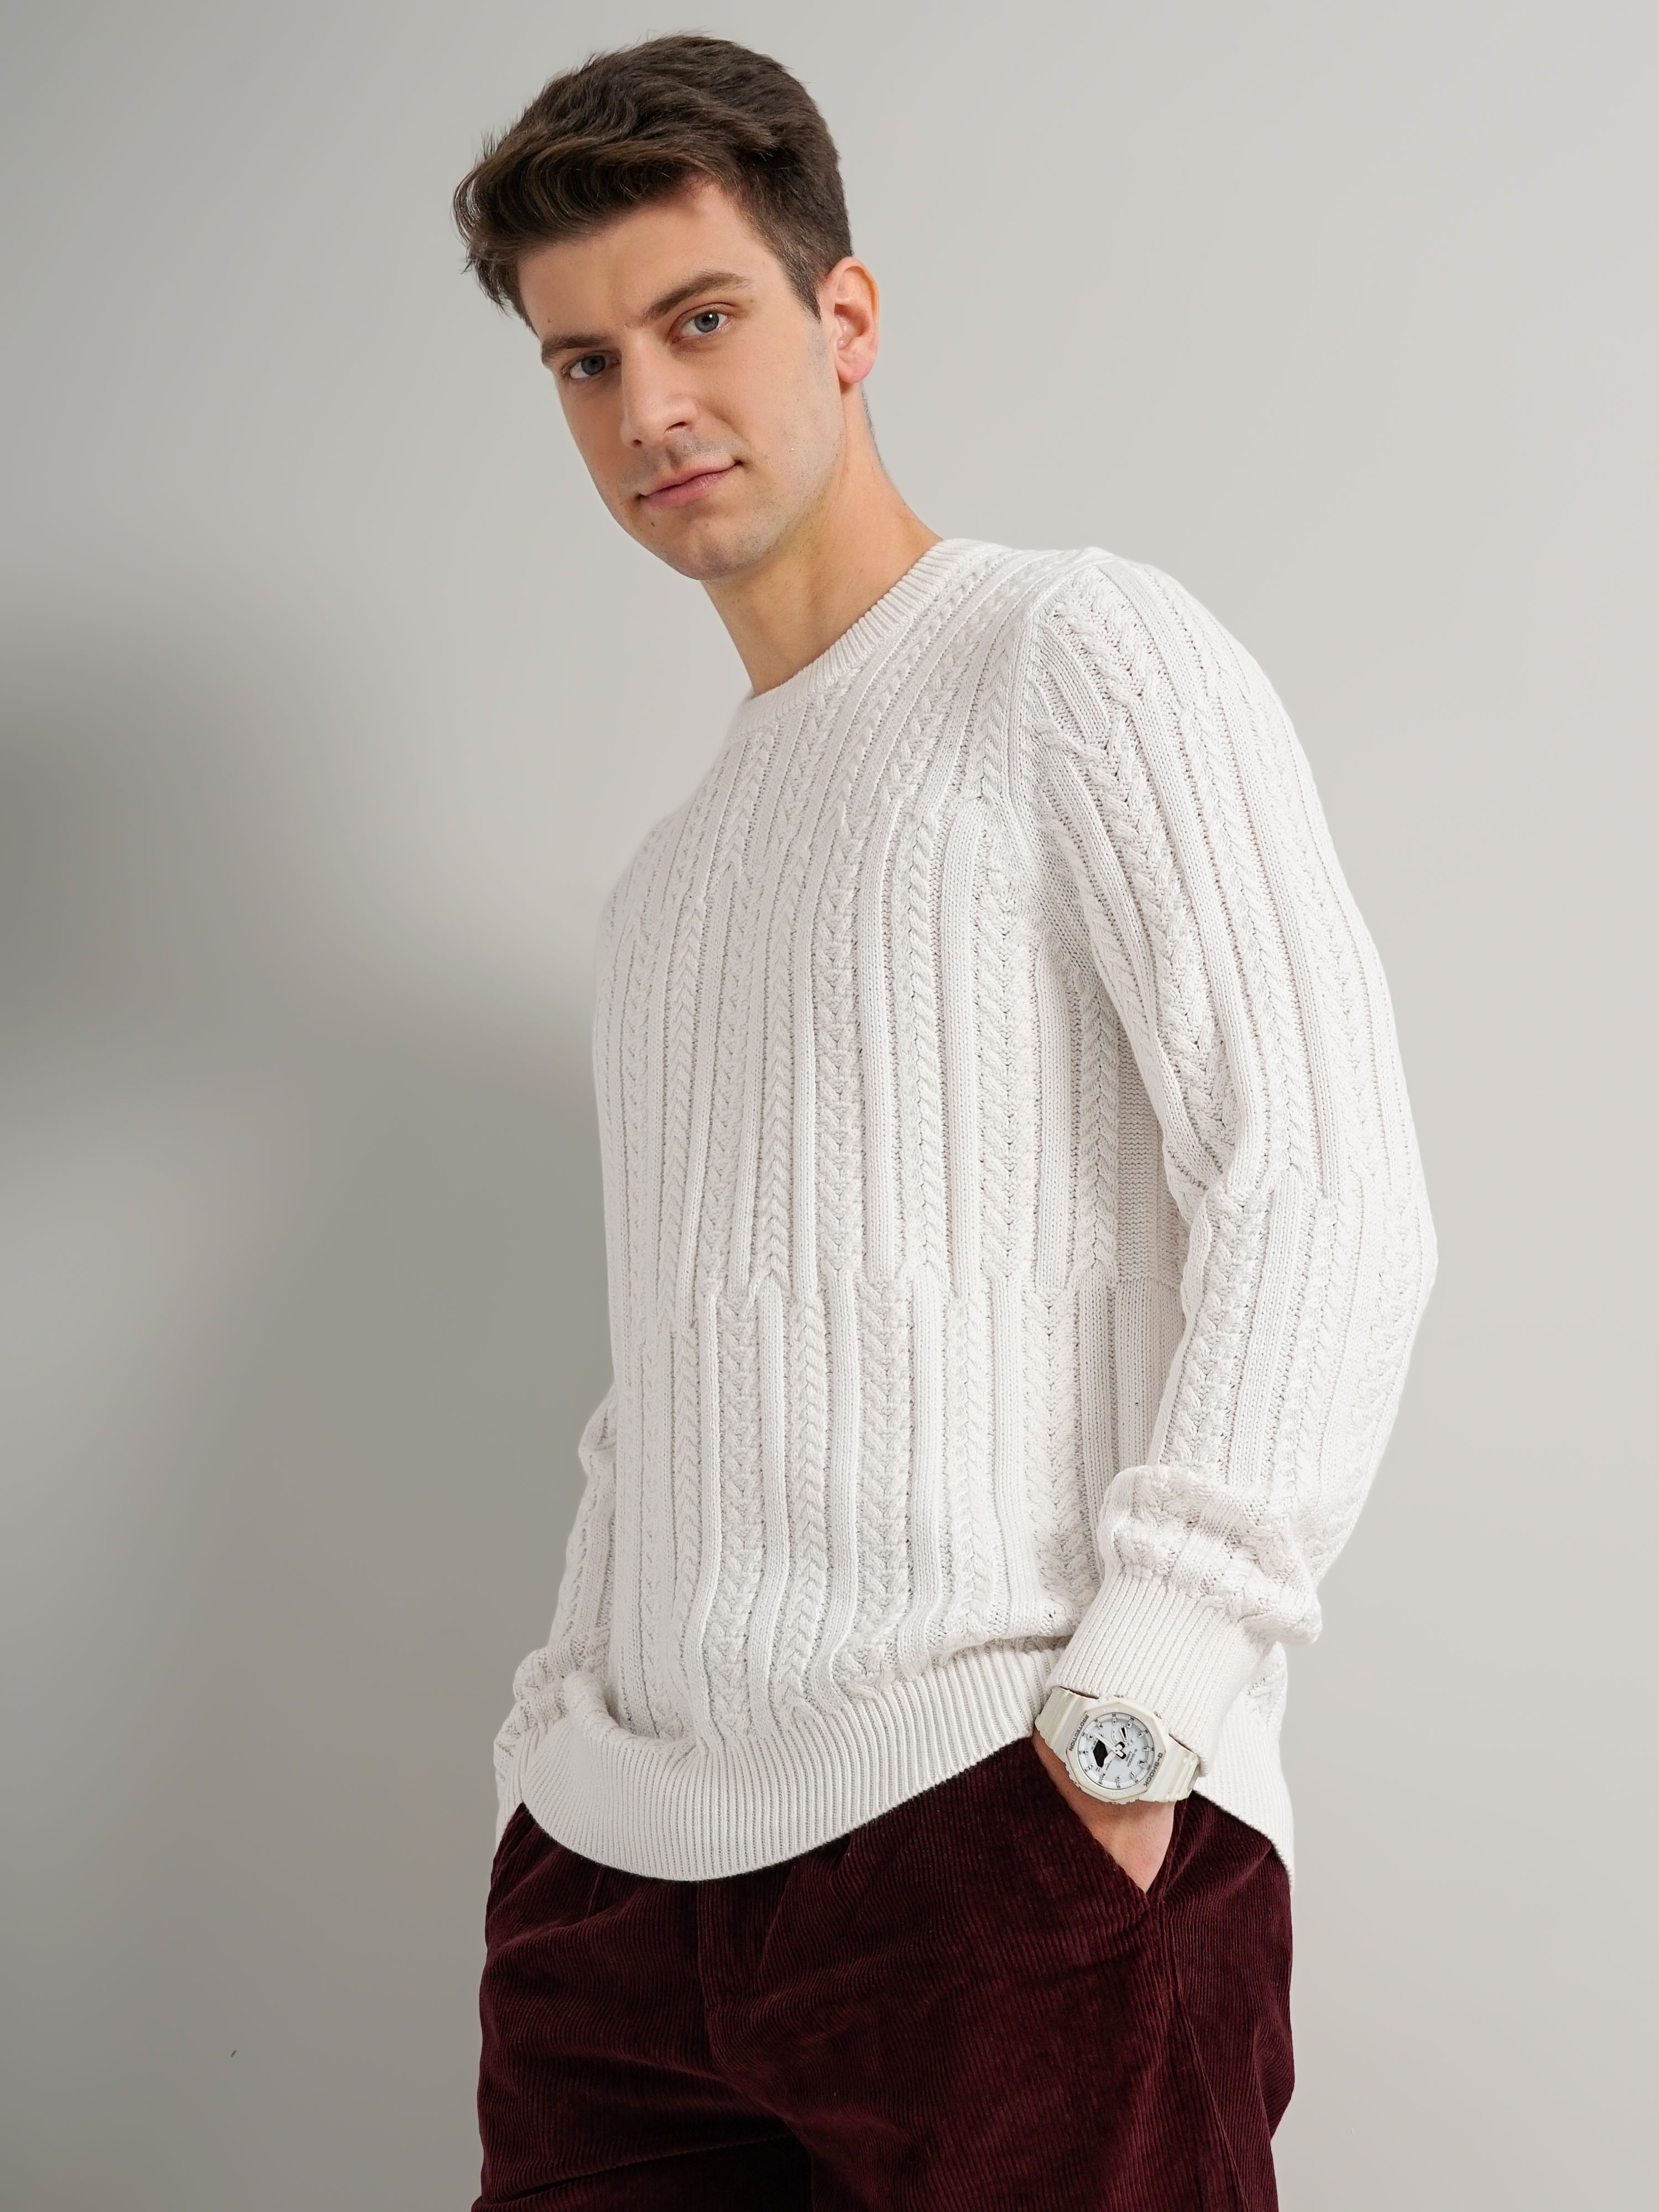 Men's White Knitted Sweaters